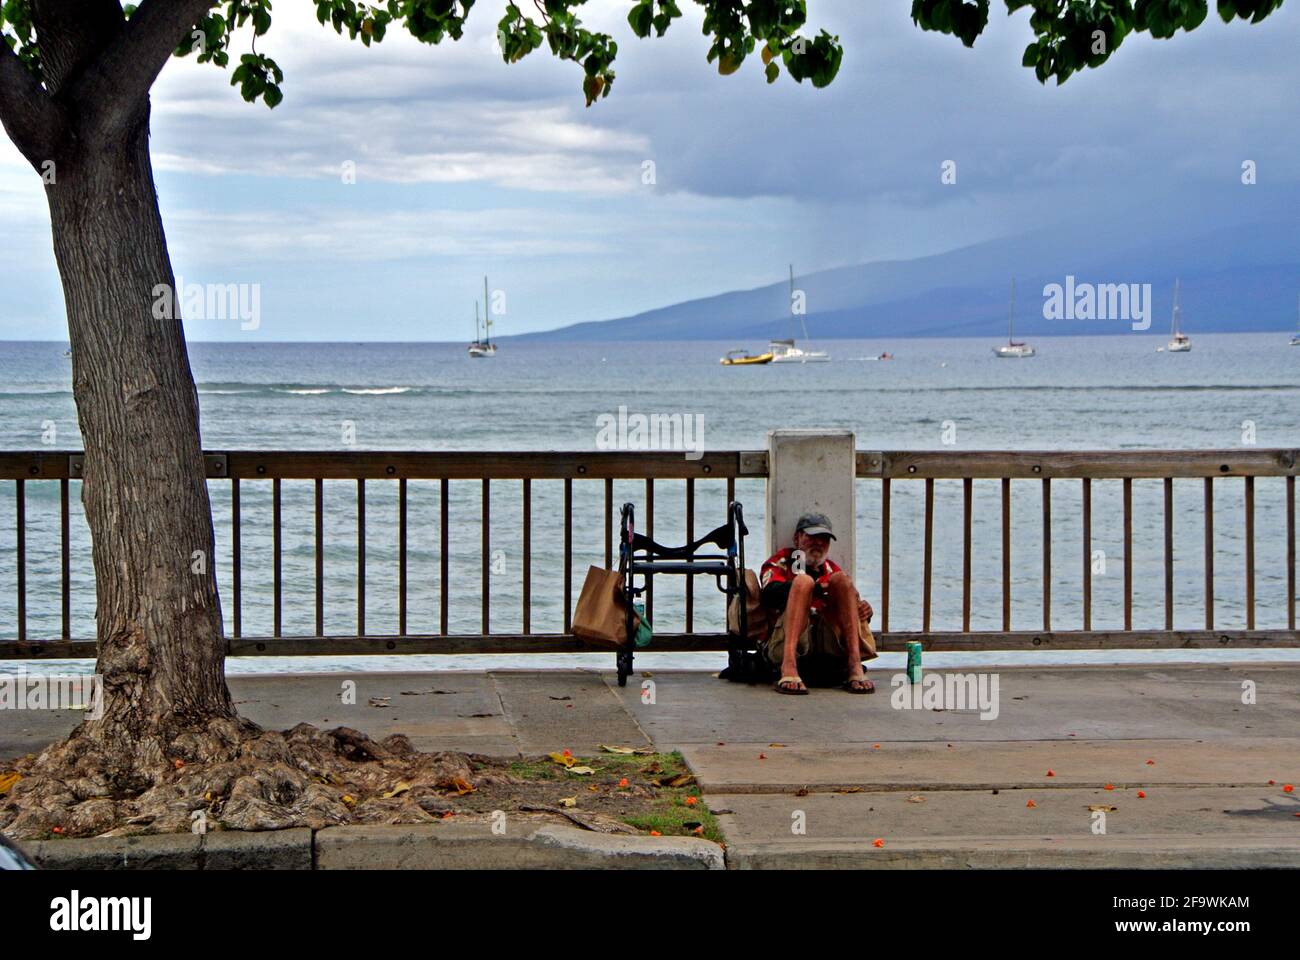 Panhandler waits for tourists early in the foggy morning in the small town of Lahaina Maui Hawaii usa Stock Photo